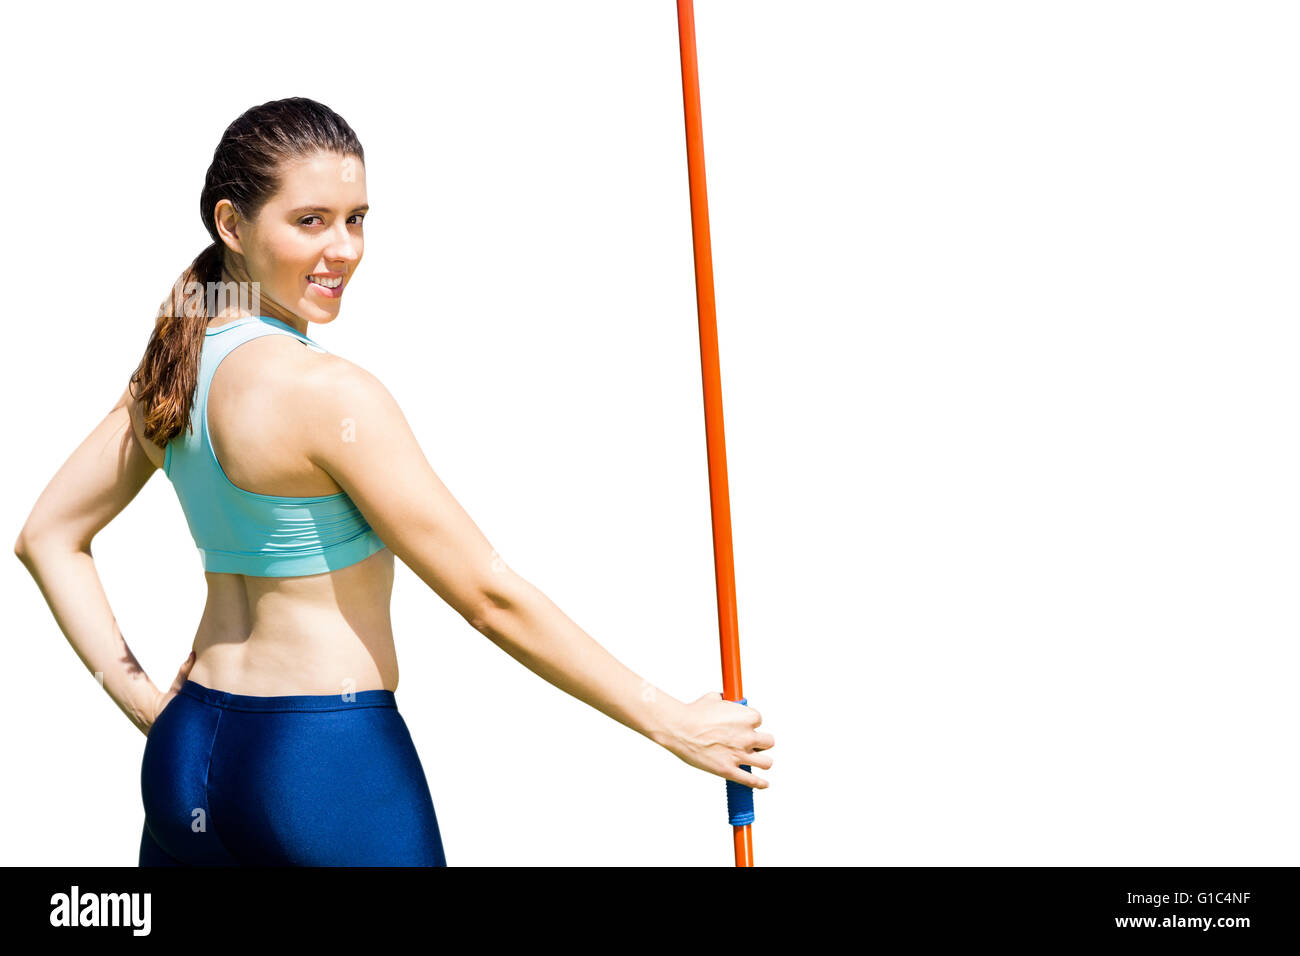 Rear view of sporty woman holding a javelin Stock Photo